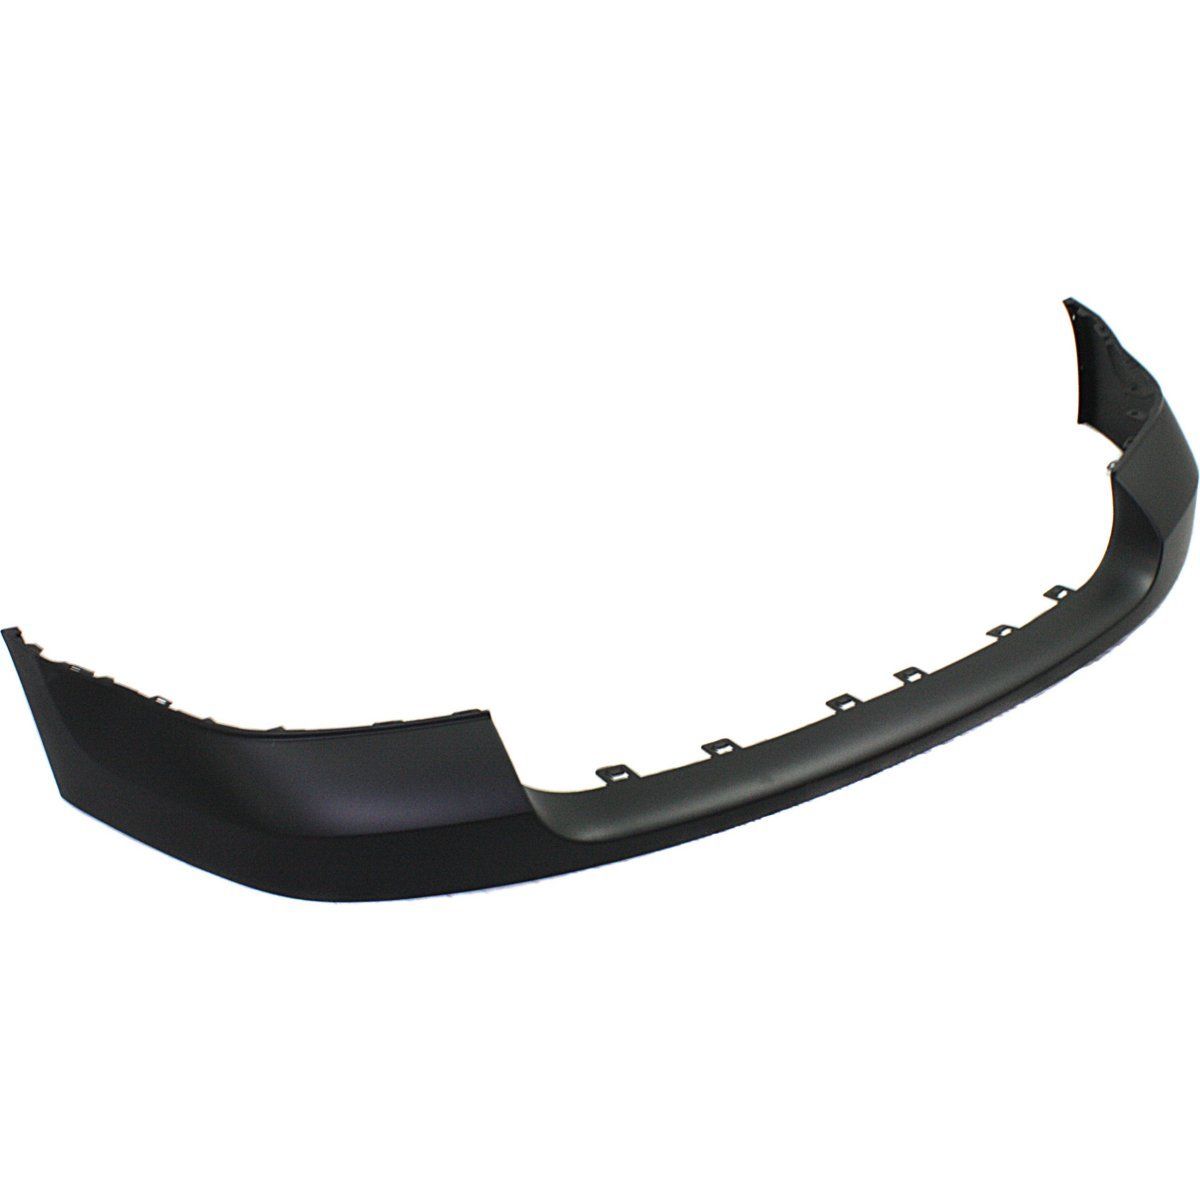 2007-2010 GMC SIERRA Front Bumper Cover 2500/3500  Black Painted to Match